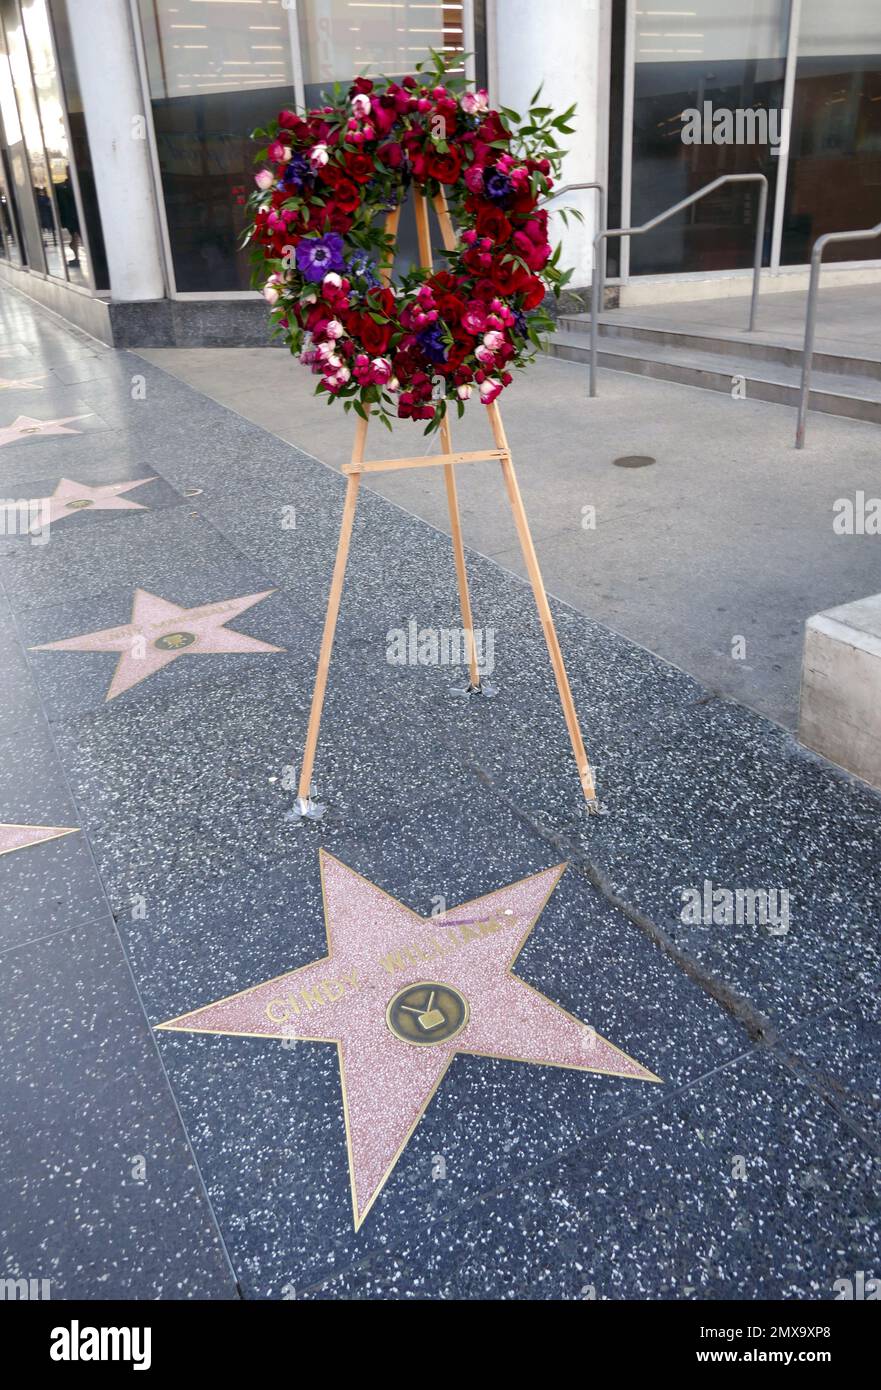 Los Angeles, California, USA 1st February 2023 A general view of atmosphere of Flowers on Actress Cindy Williams Hollywood Walk of Fame Star on February 1, 2023 in Los Angeles, California, USA. Photo by Barry King/Alamy Stock Photo Stock Photo